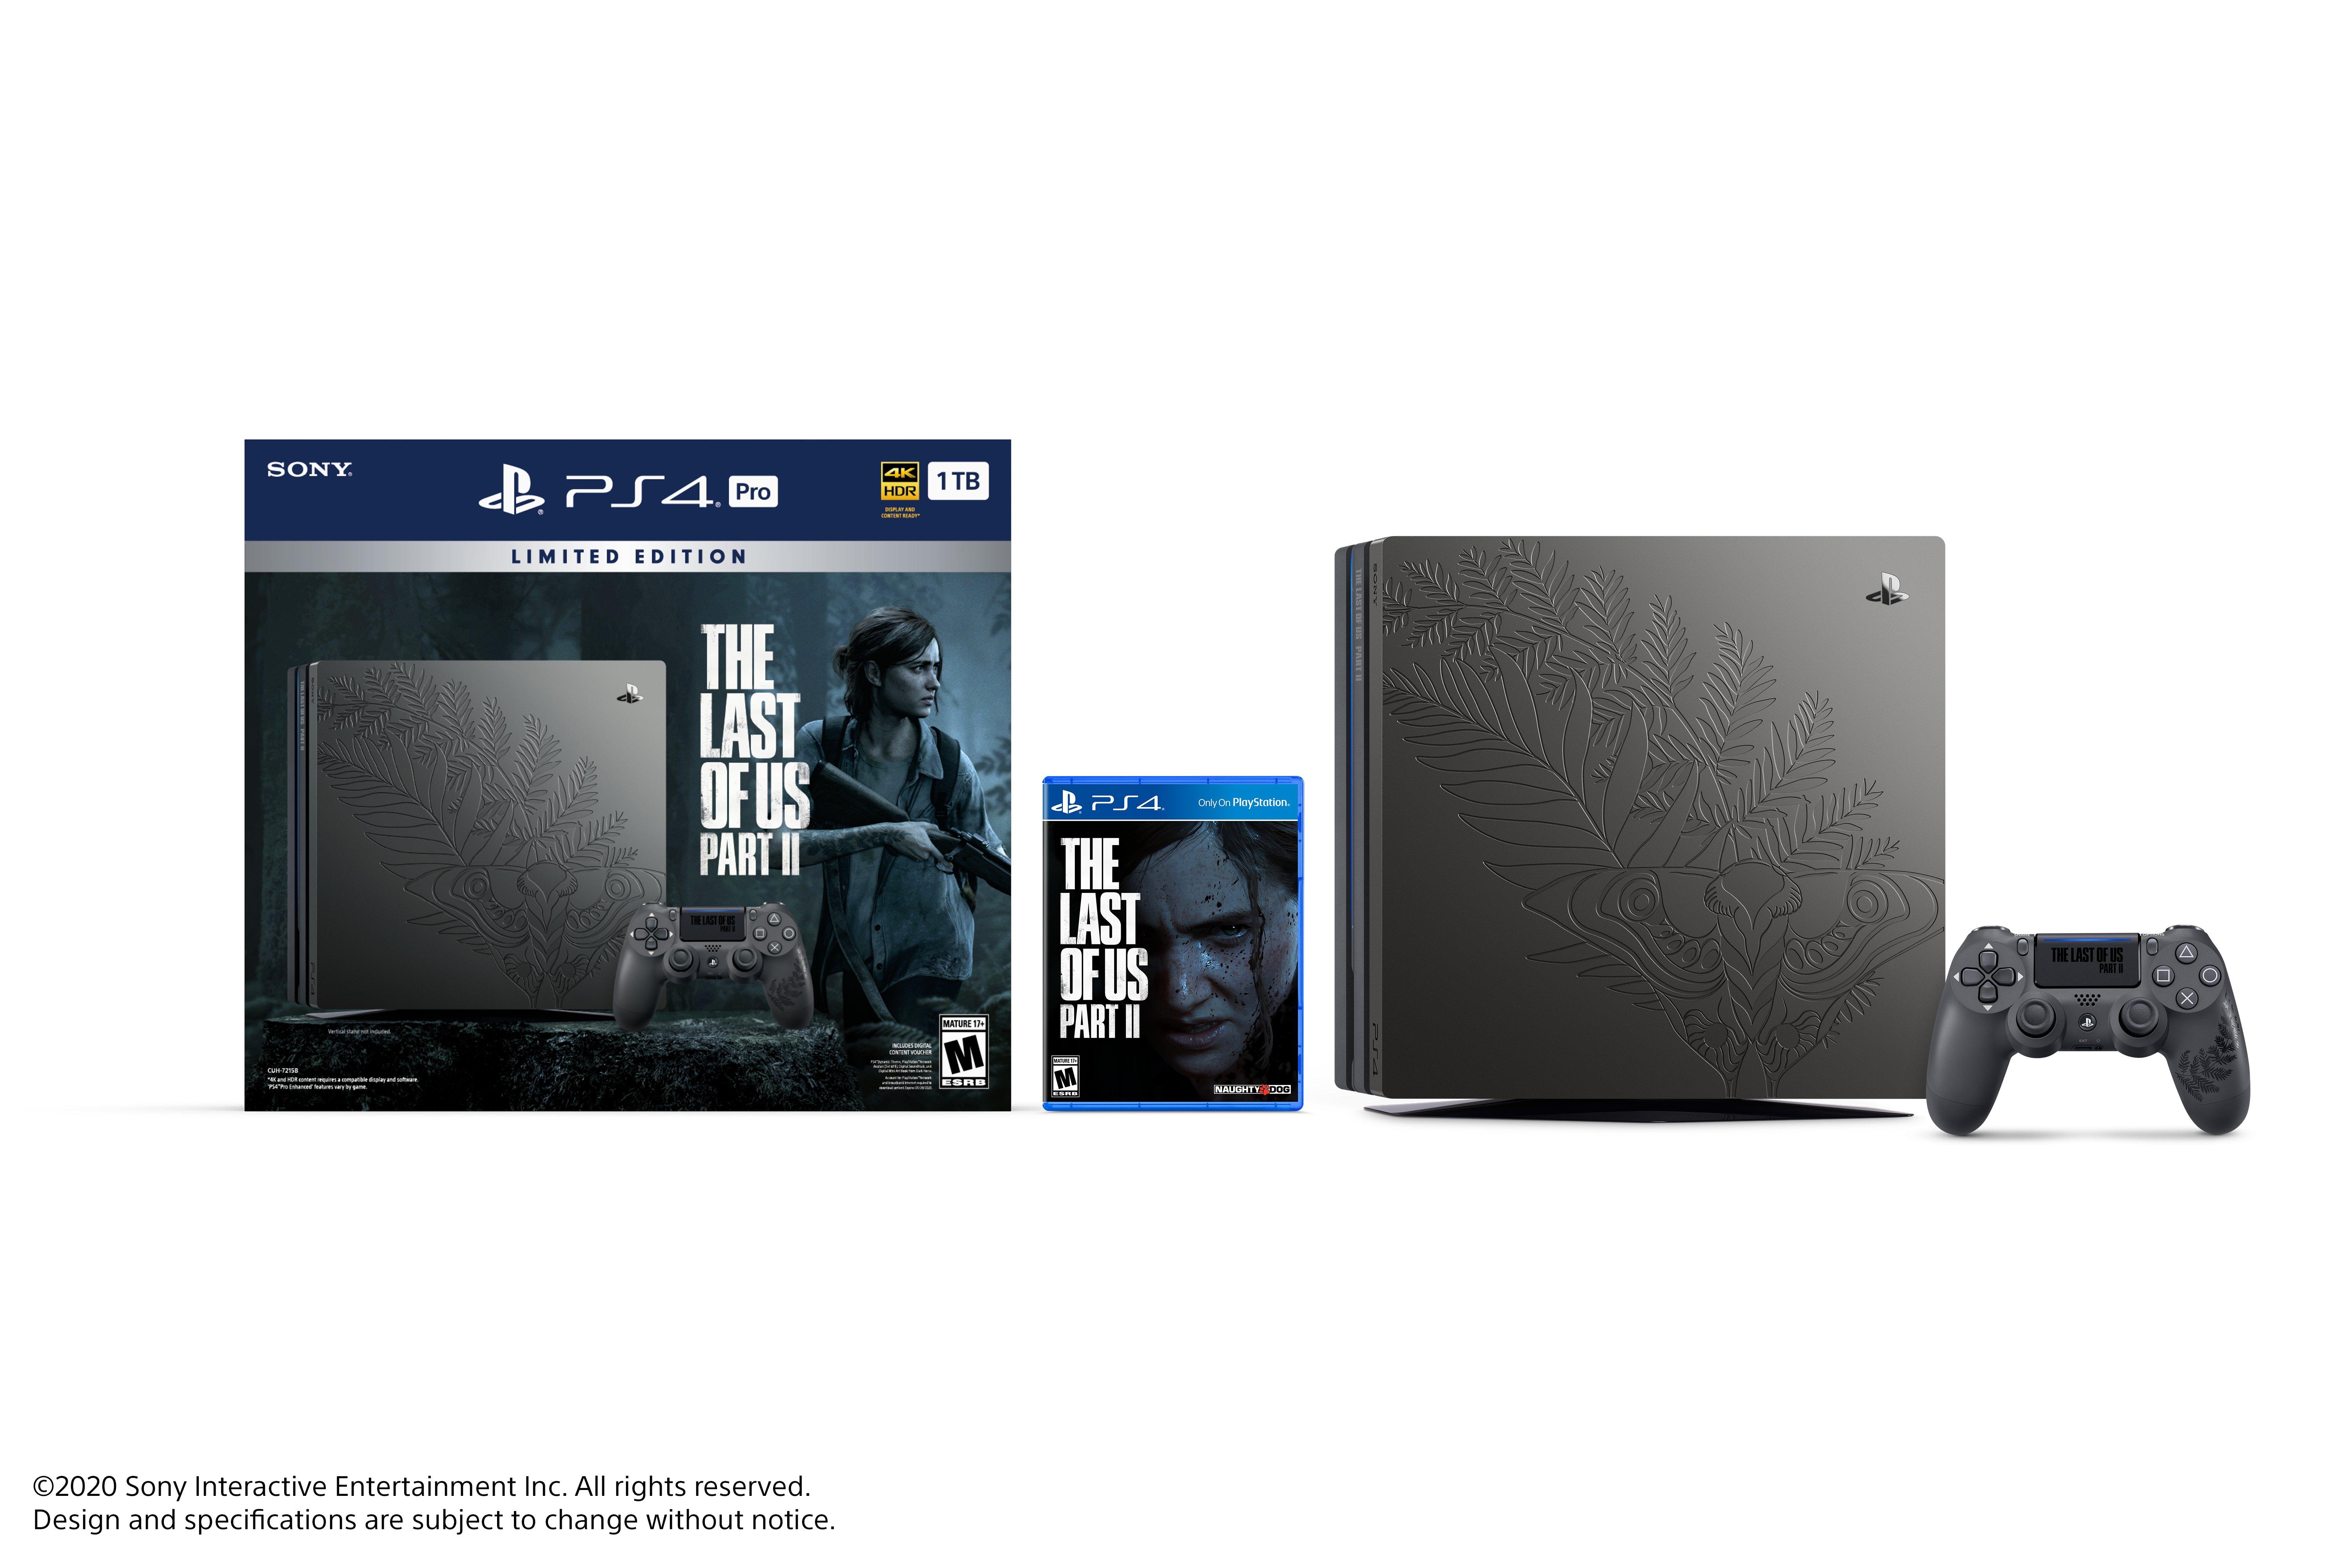 ps4 limited edition uncharted 4 1tb